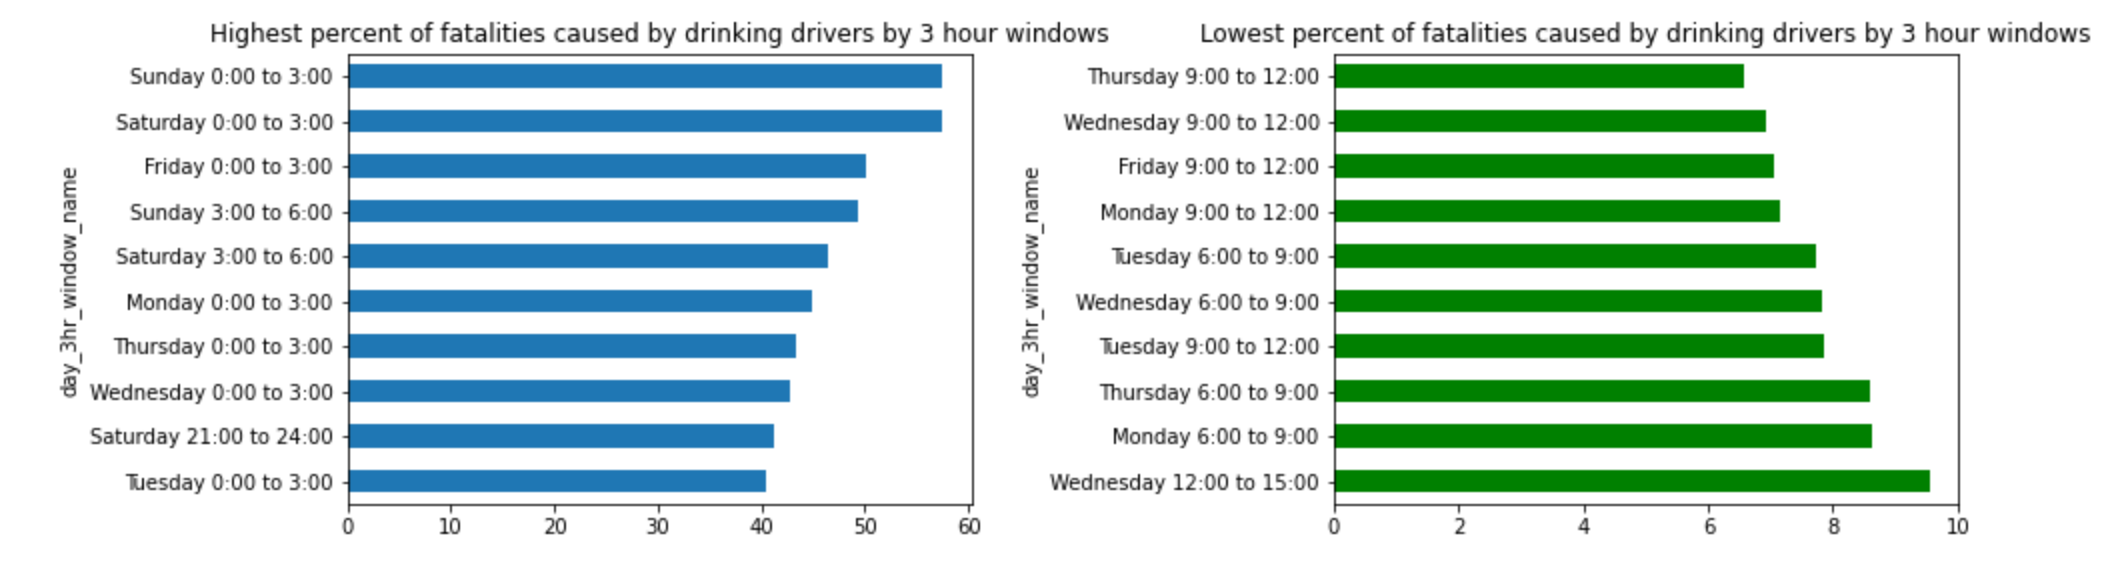 Highest and lowest percent by 3 hour windows